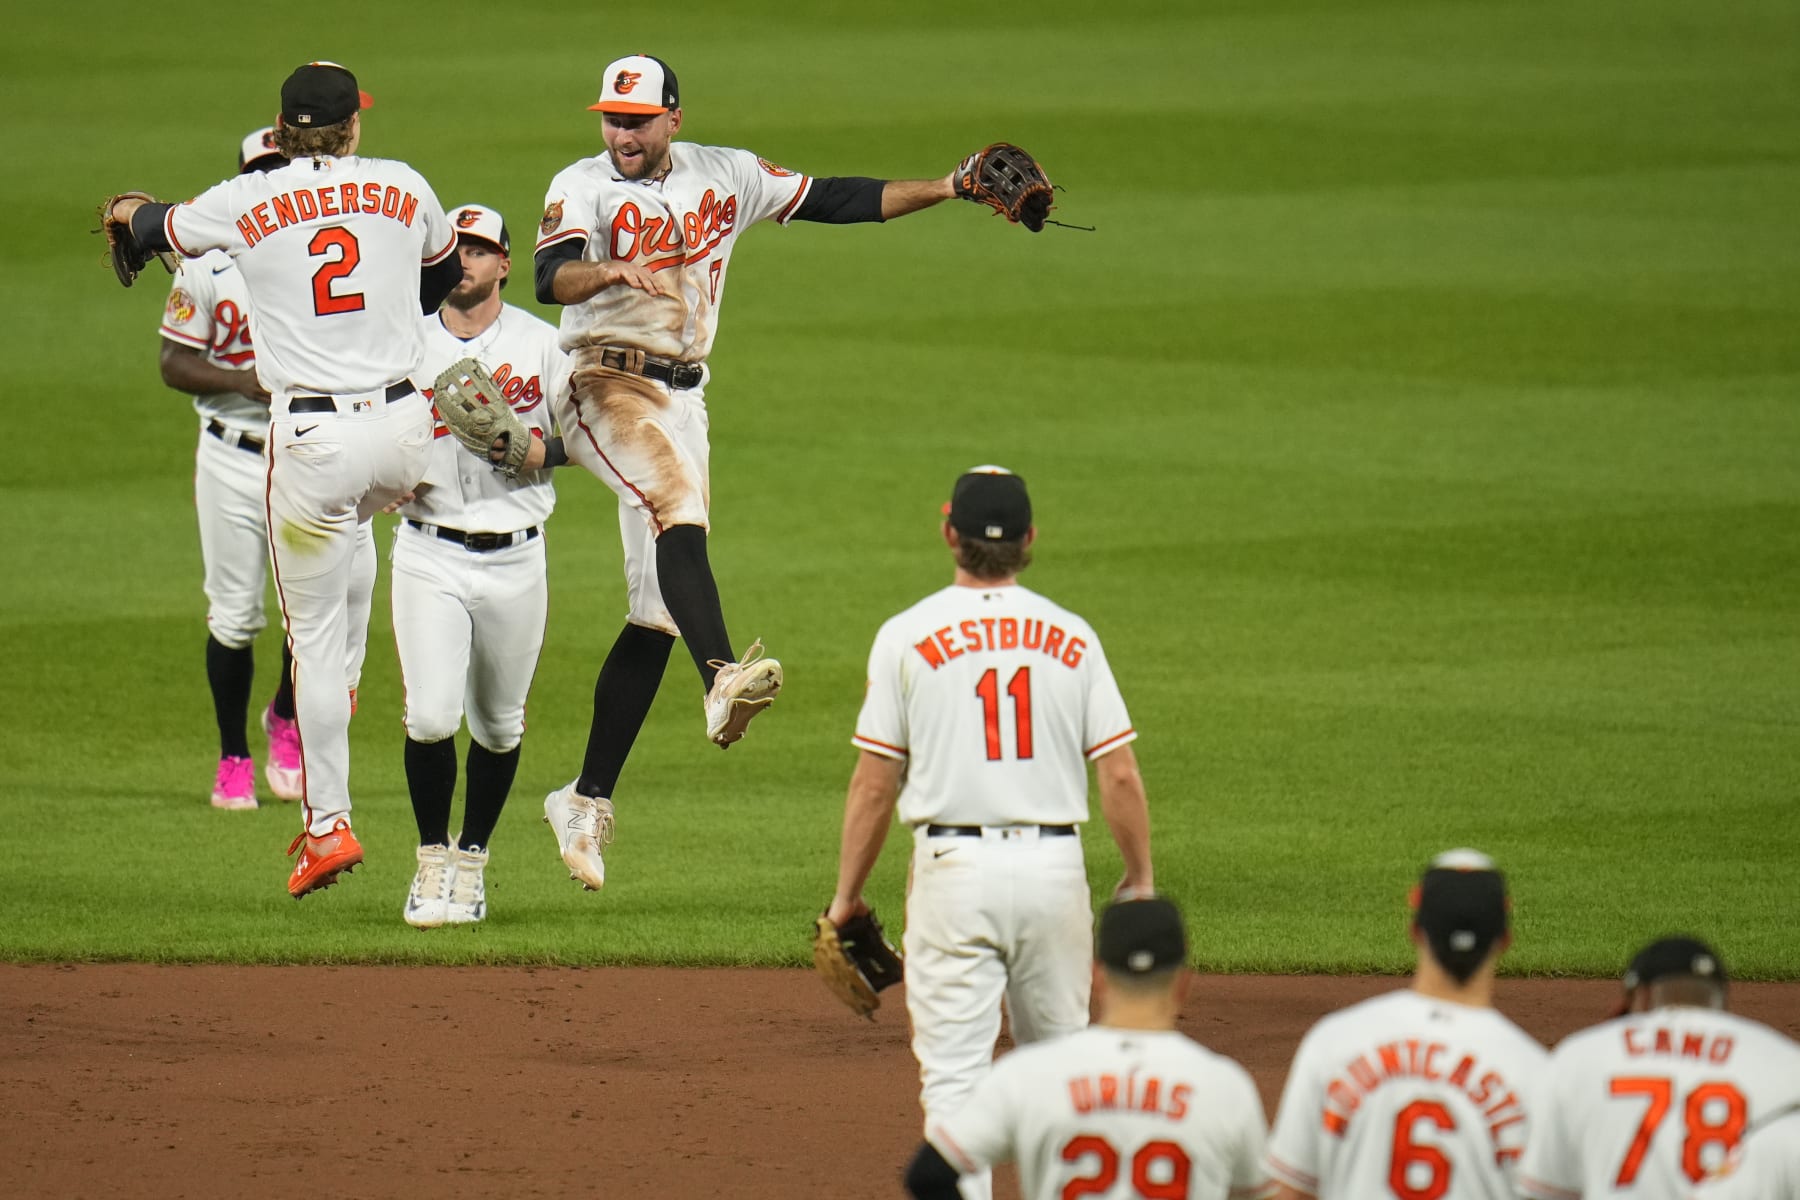 Orioles Beat Red Sox, but No Celebrating Yet - The New York Times